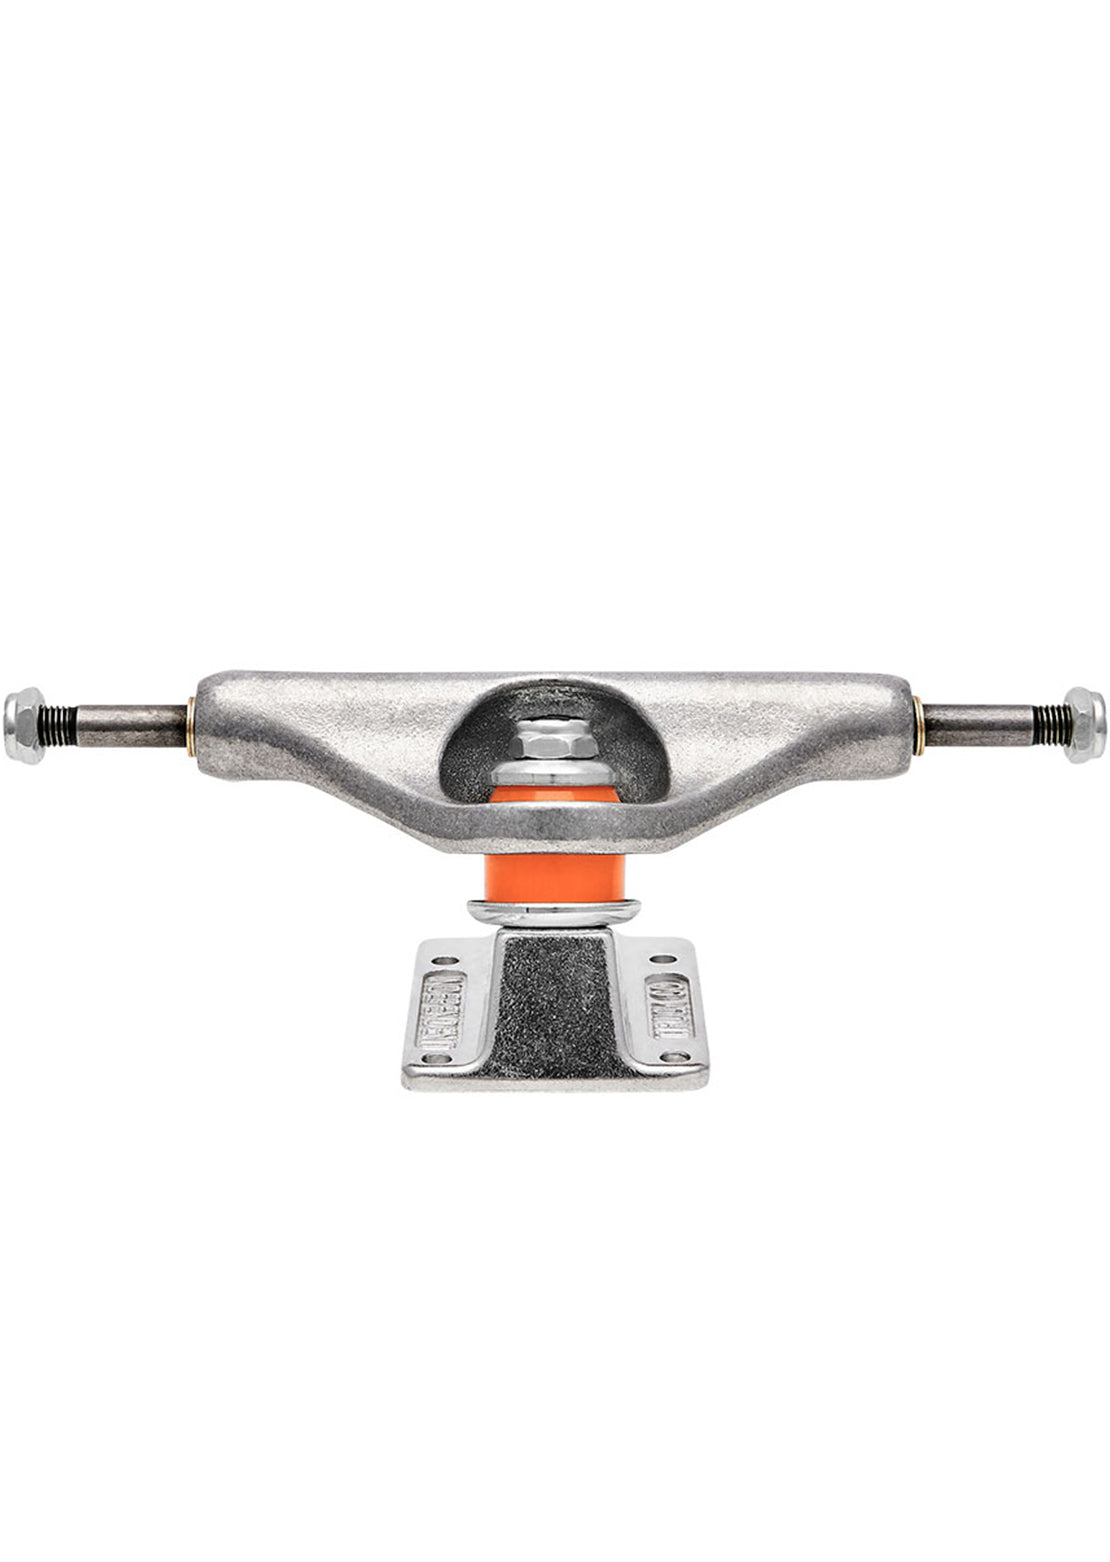 Independent Stage 11 Hollow 2-Pack Skateboard Trucks - 159mm